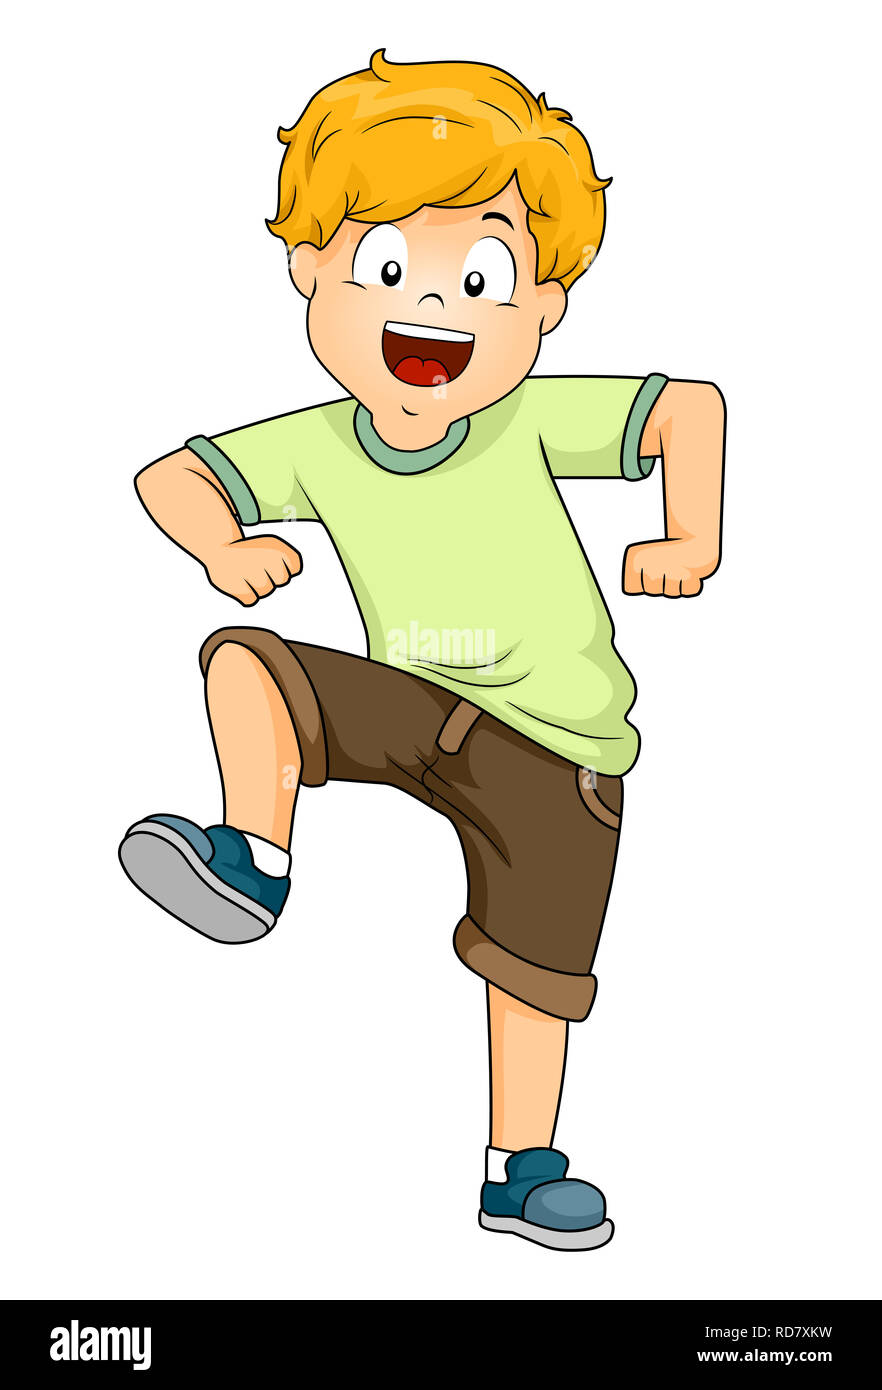 Illustration of a Kid Boy Stomping with His Right Foot Stock Photo